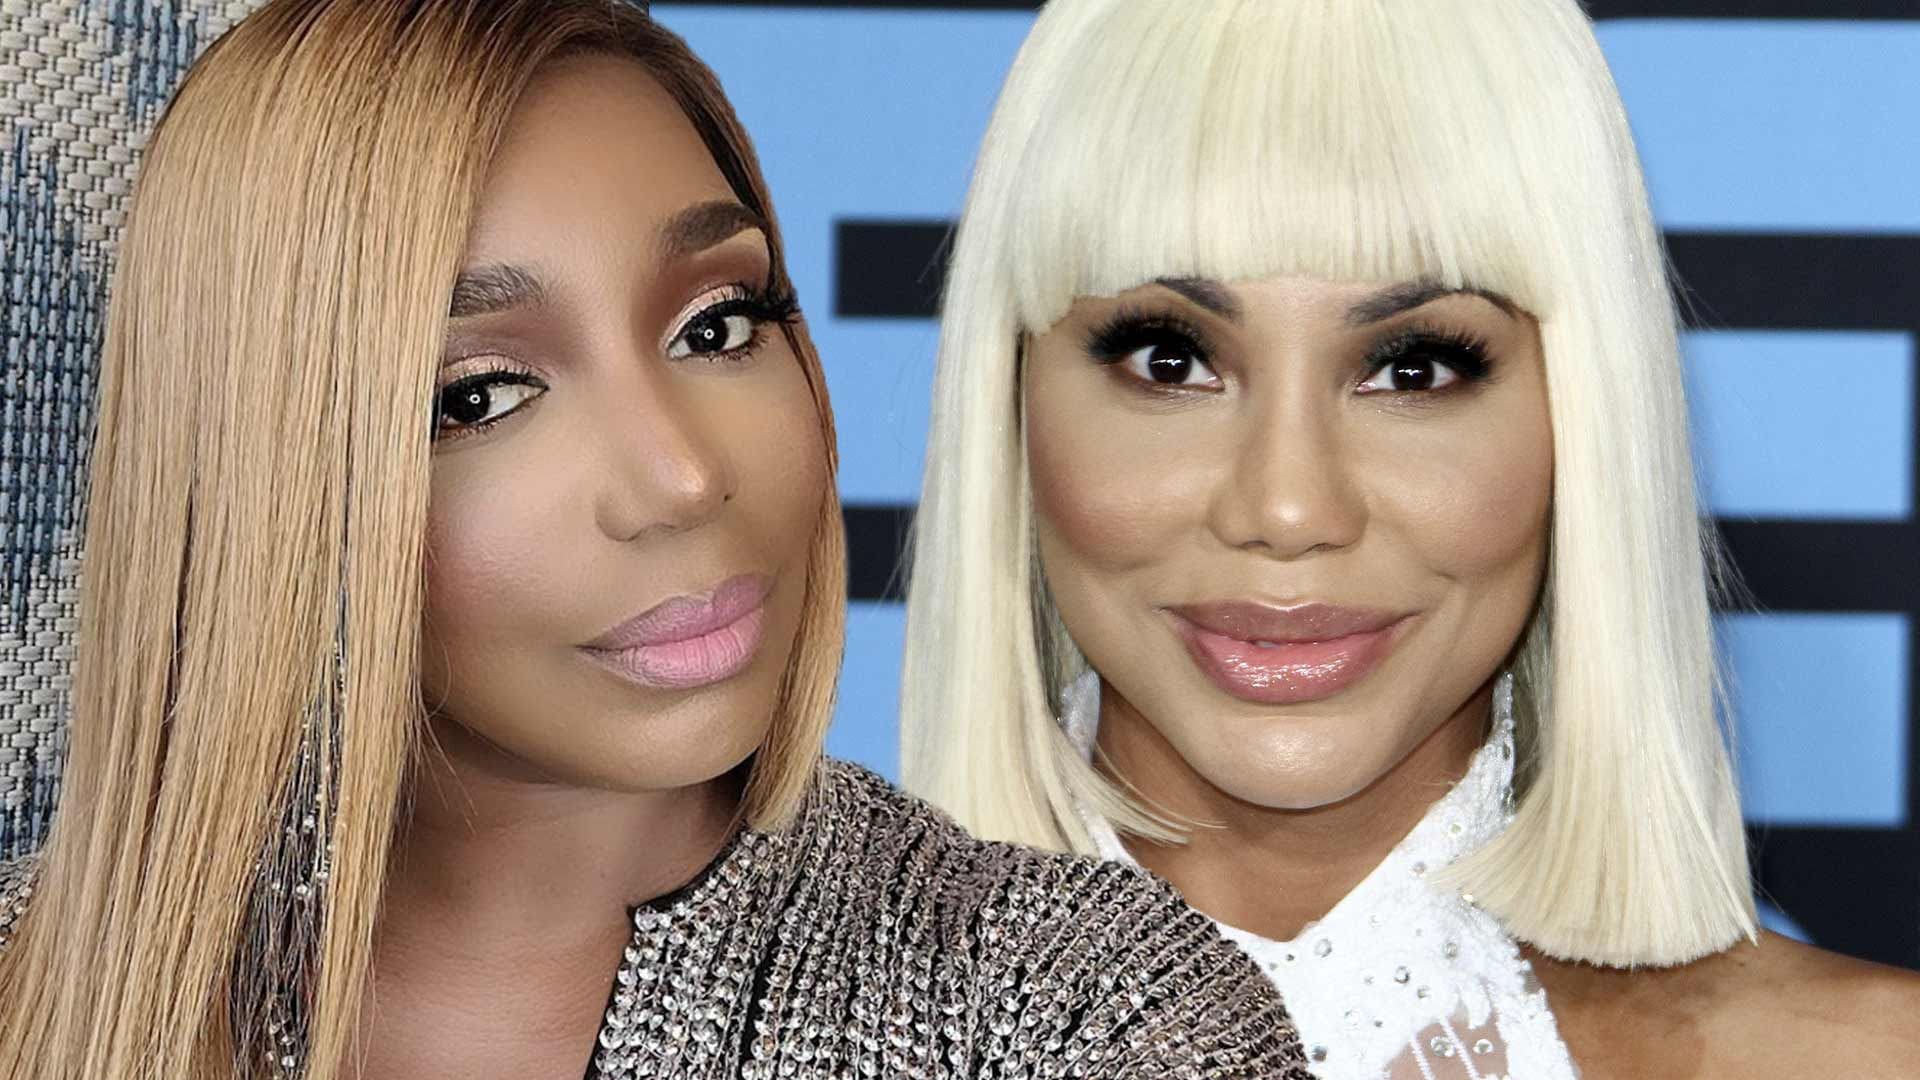 NeNe Leakes Shares An Update About Tamar Braxton And Her Own Life - See The Video